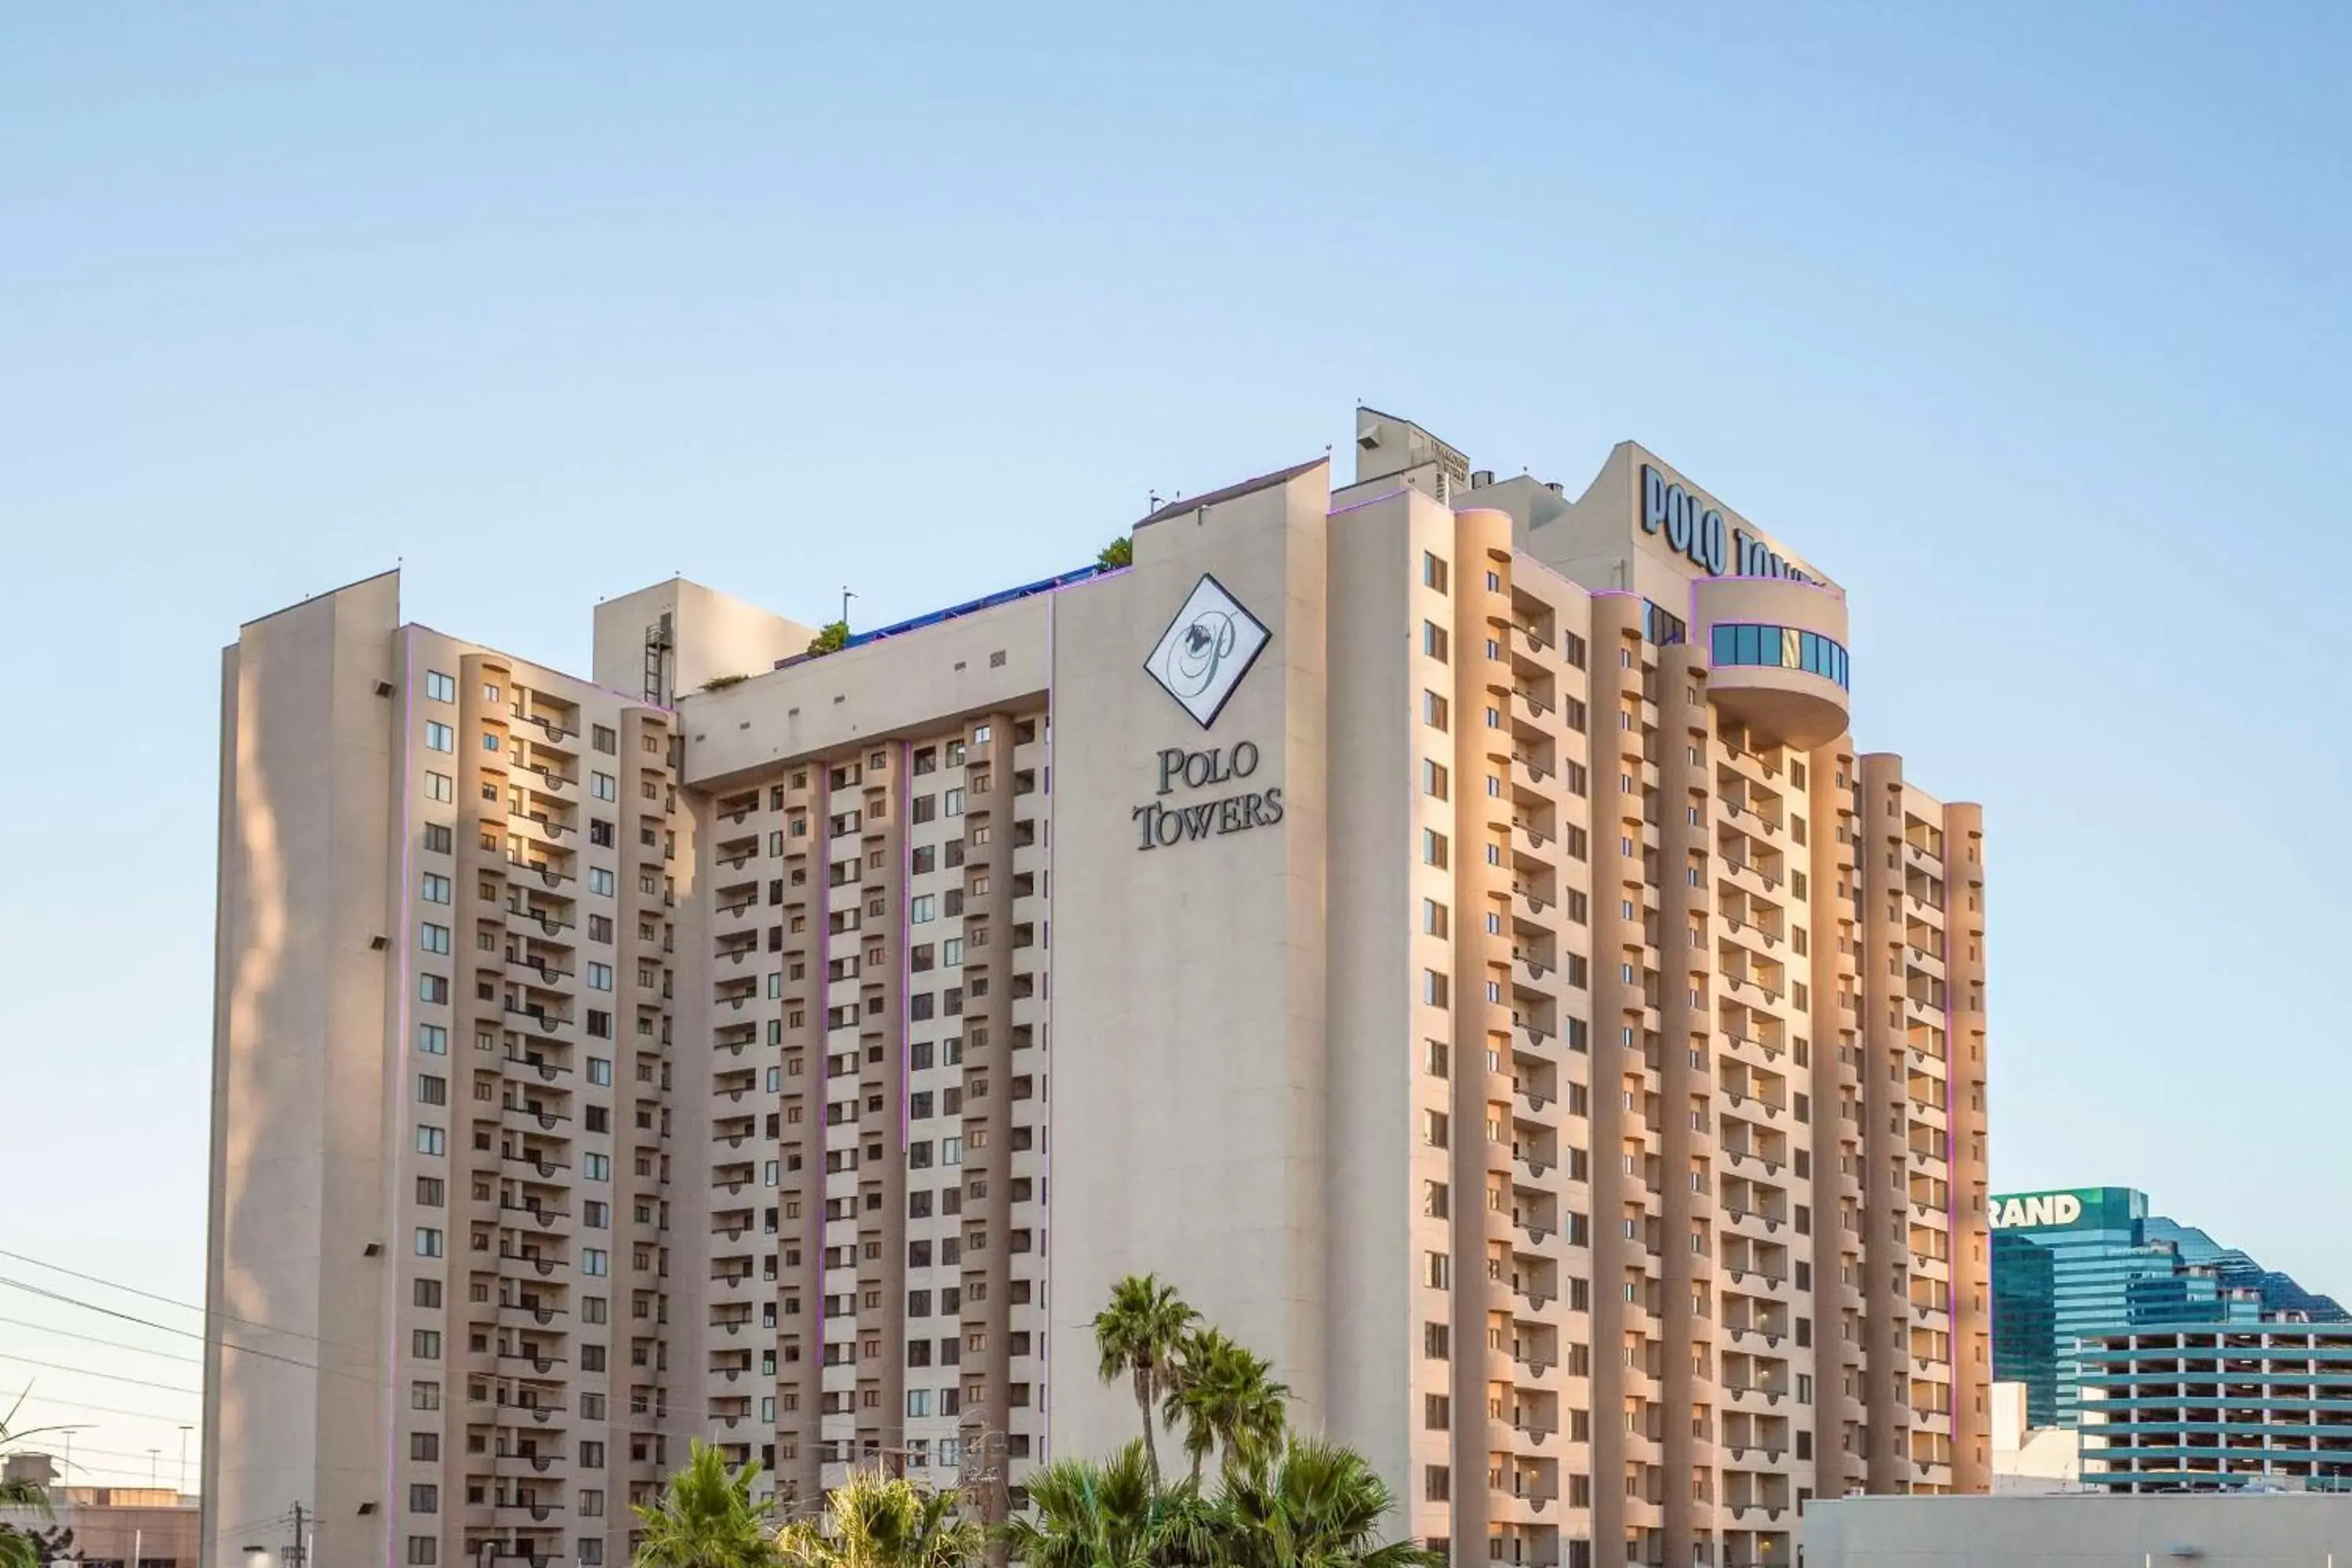 Property Building in Hilton Vacation Club Polo Towers Las Vegas